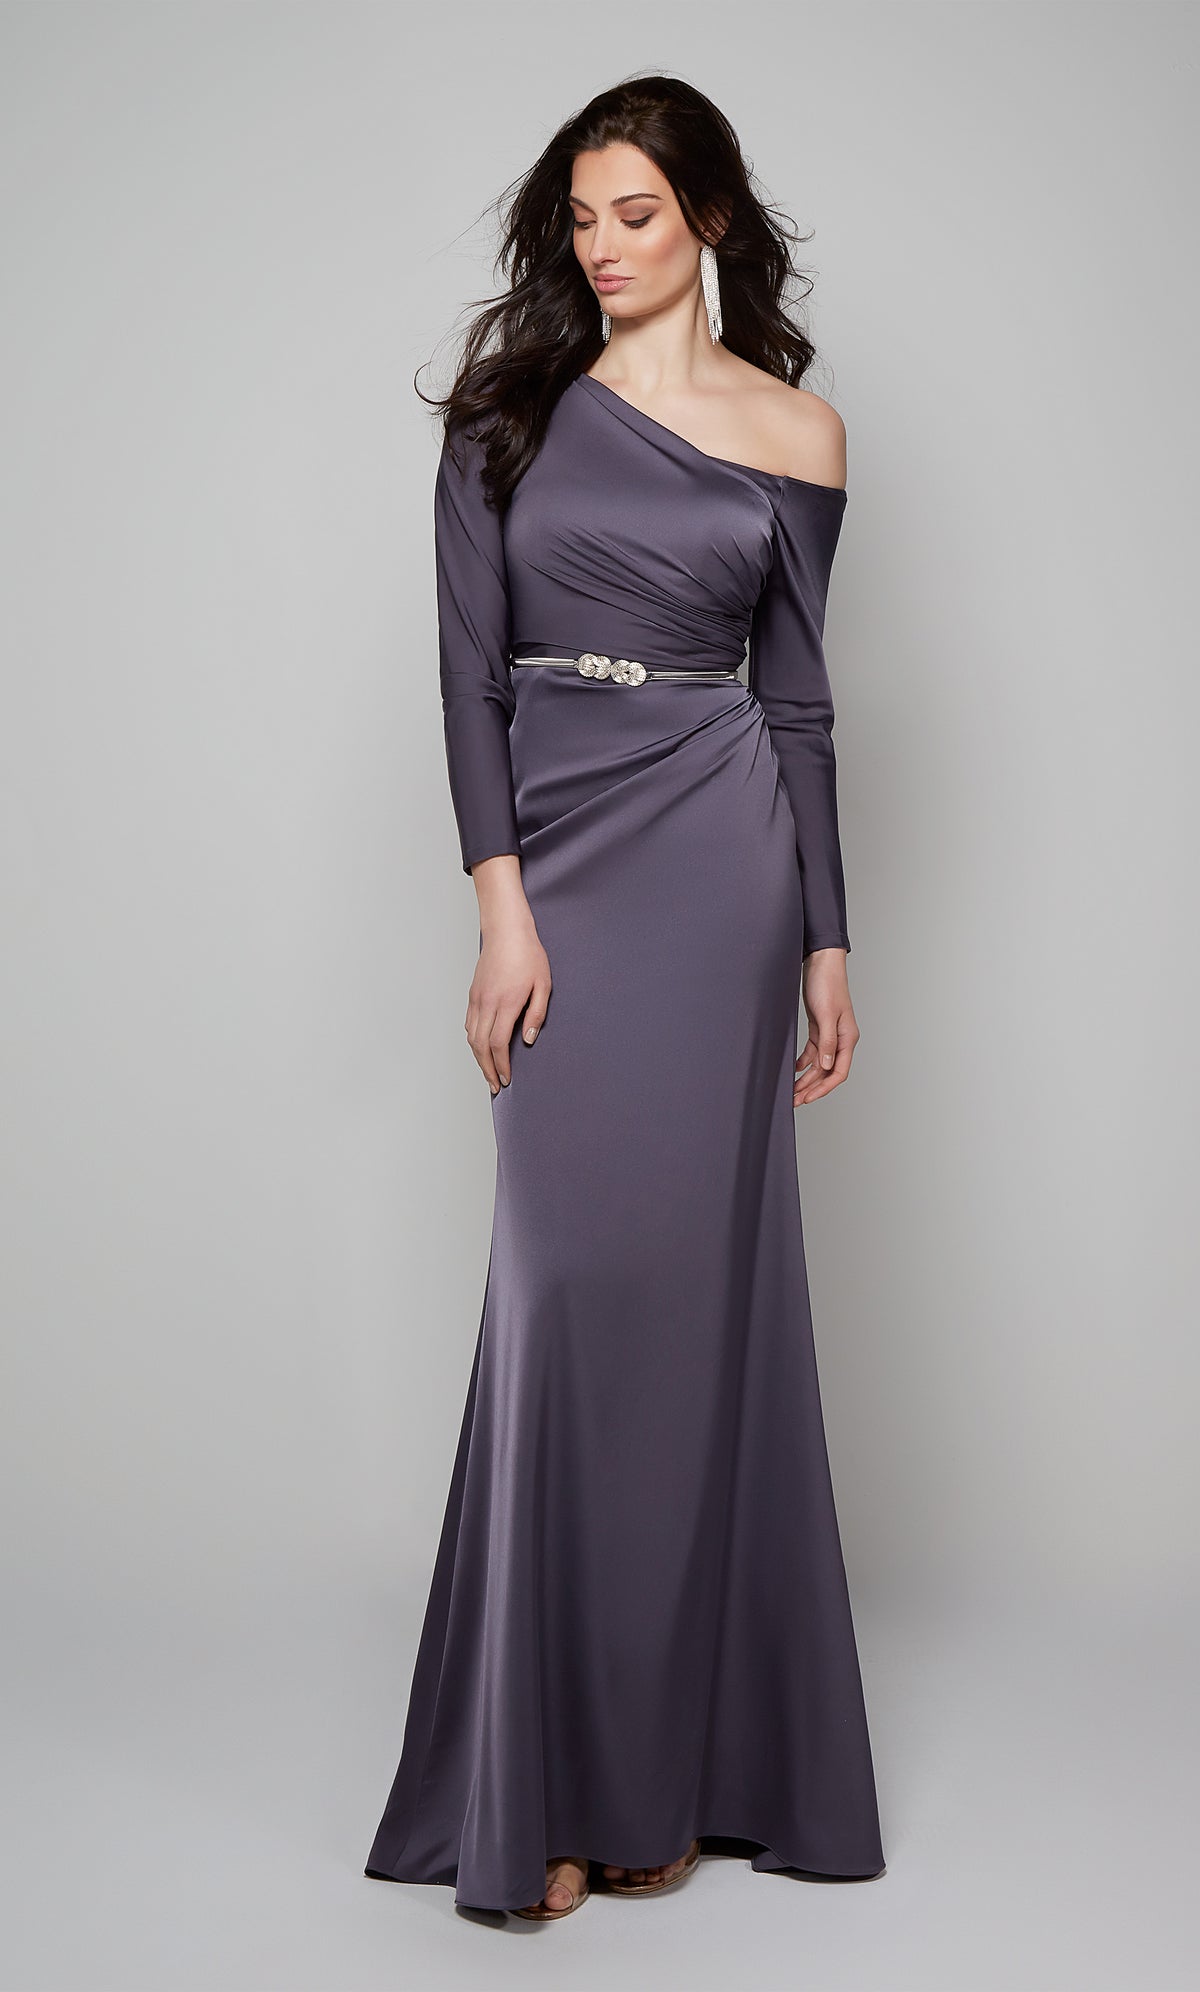 Graphite long sleeve mother of the groom dress with ruching detail.